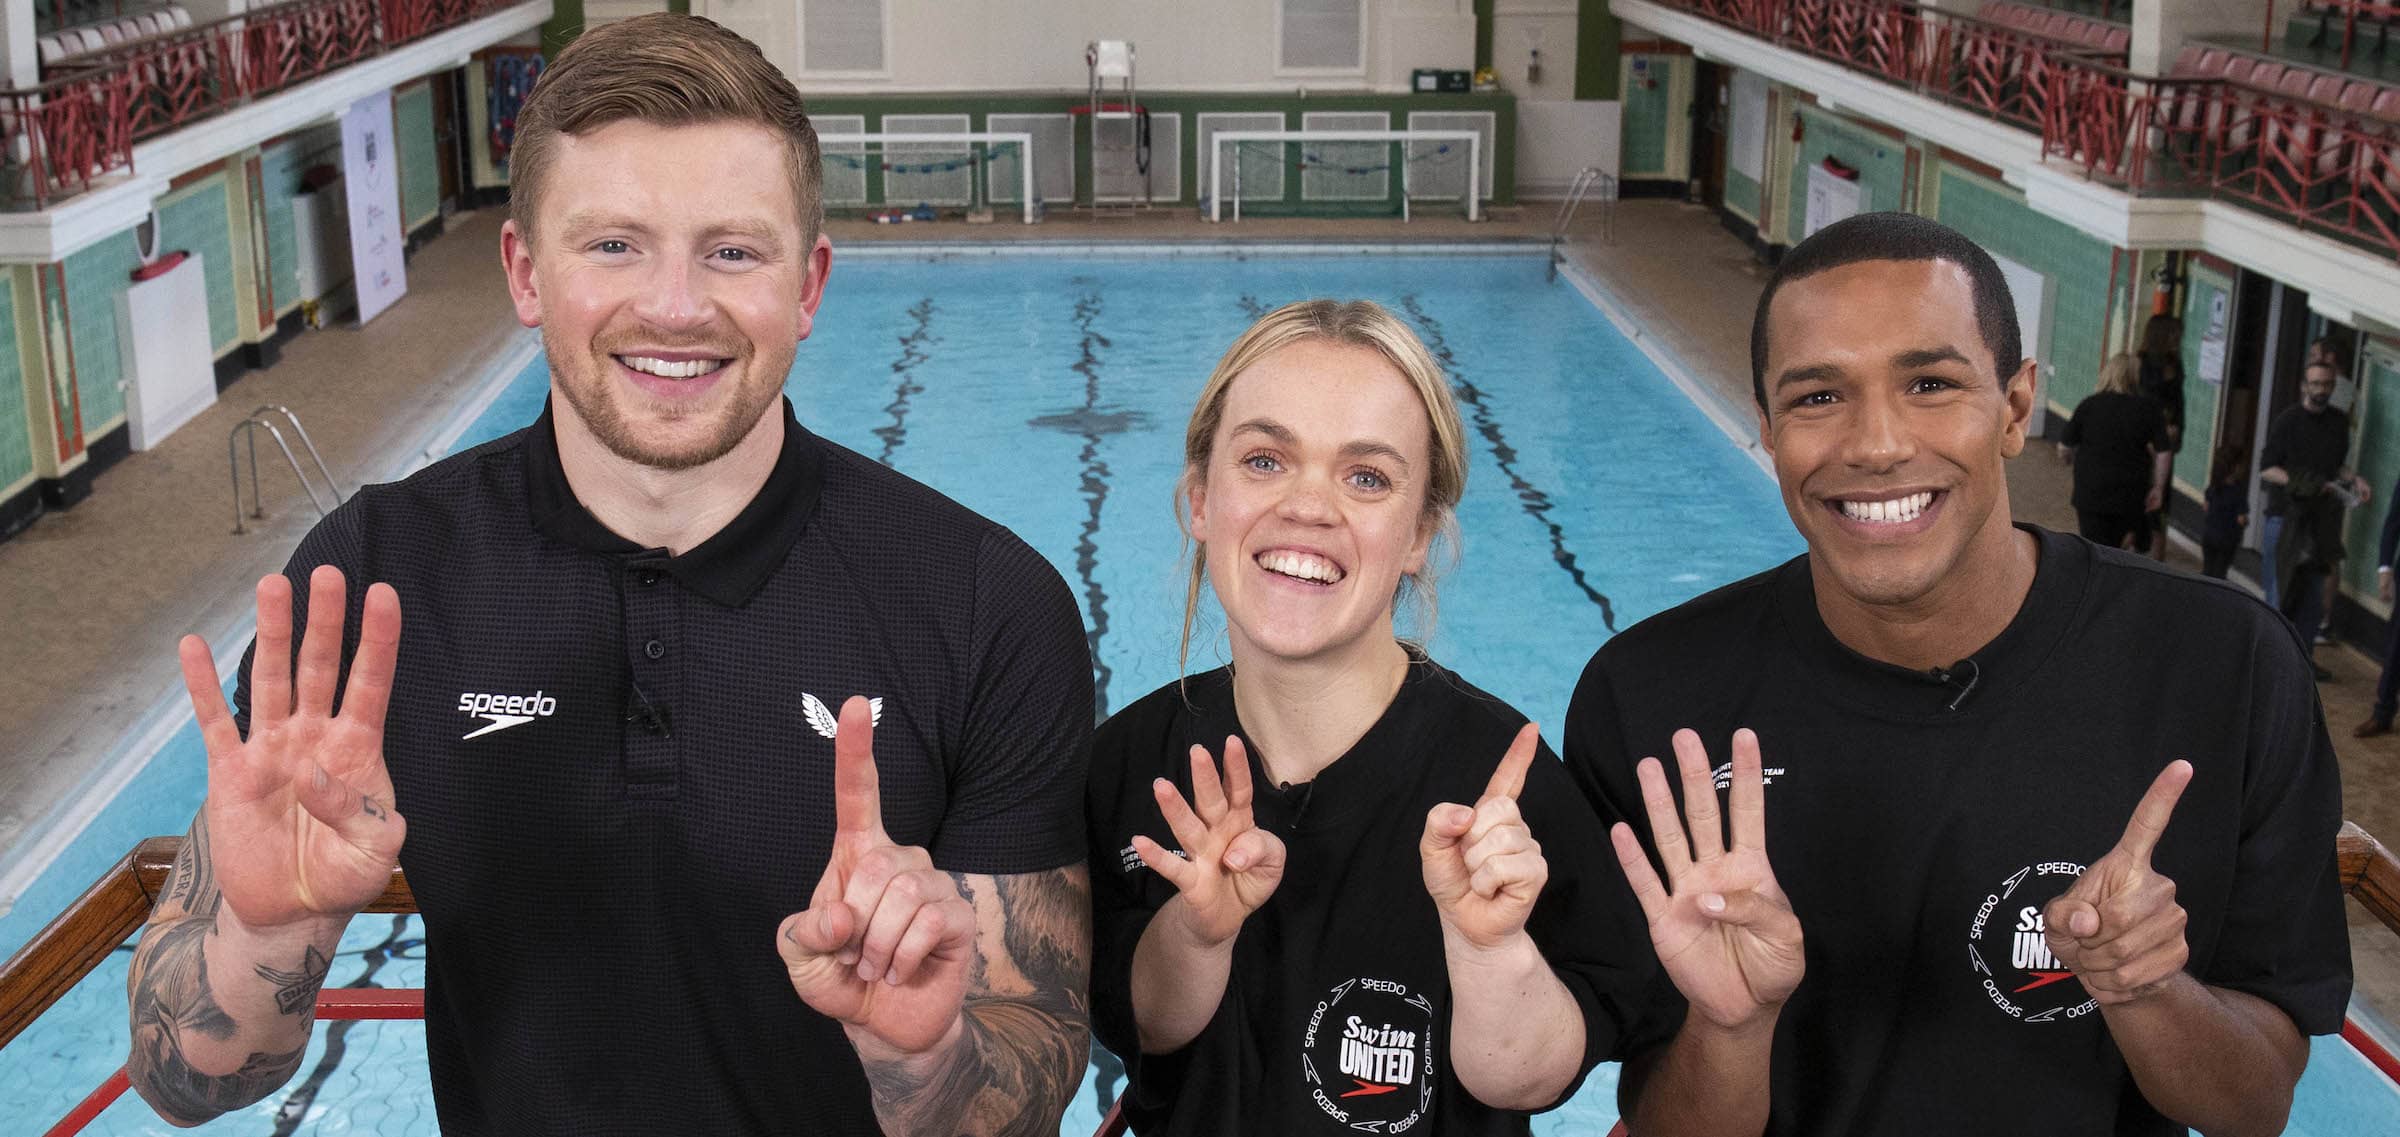 Adam peaty, legendary paralympian ellie simmonds and recently retired international swimmer and campaigner michael gunning